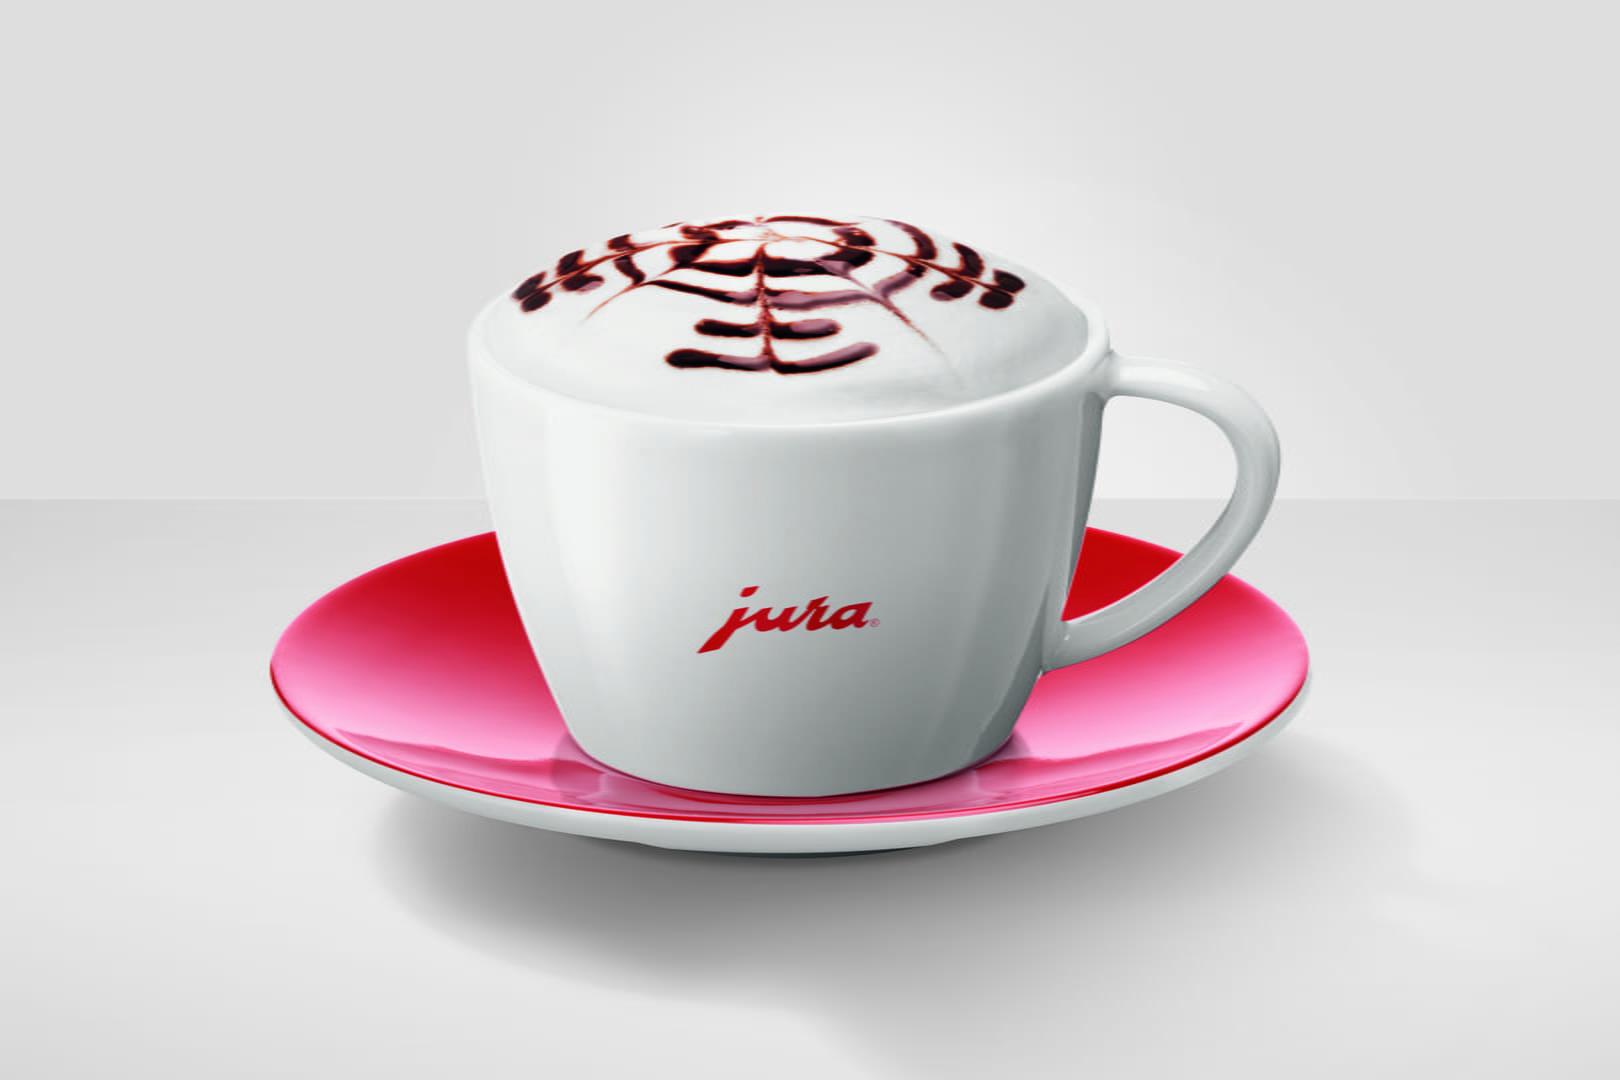 https://sg.jura.com/-/media/global/images/home-products/accessories/geschirrkollektion/gallery_cap_cup_red.jpg